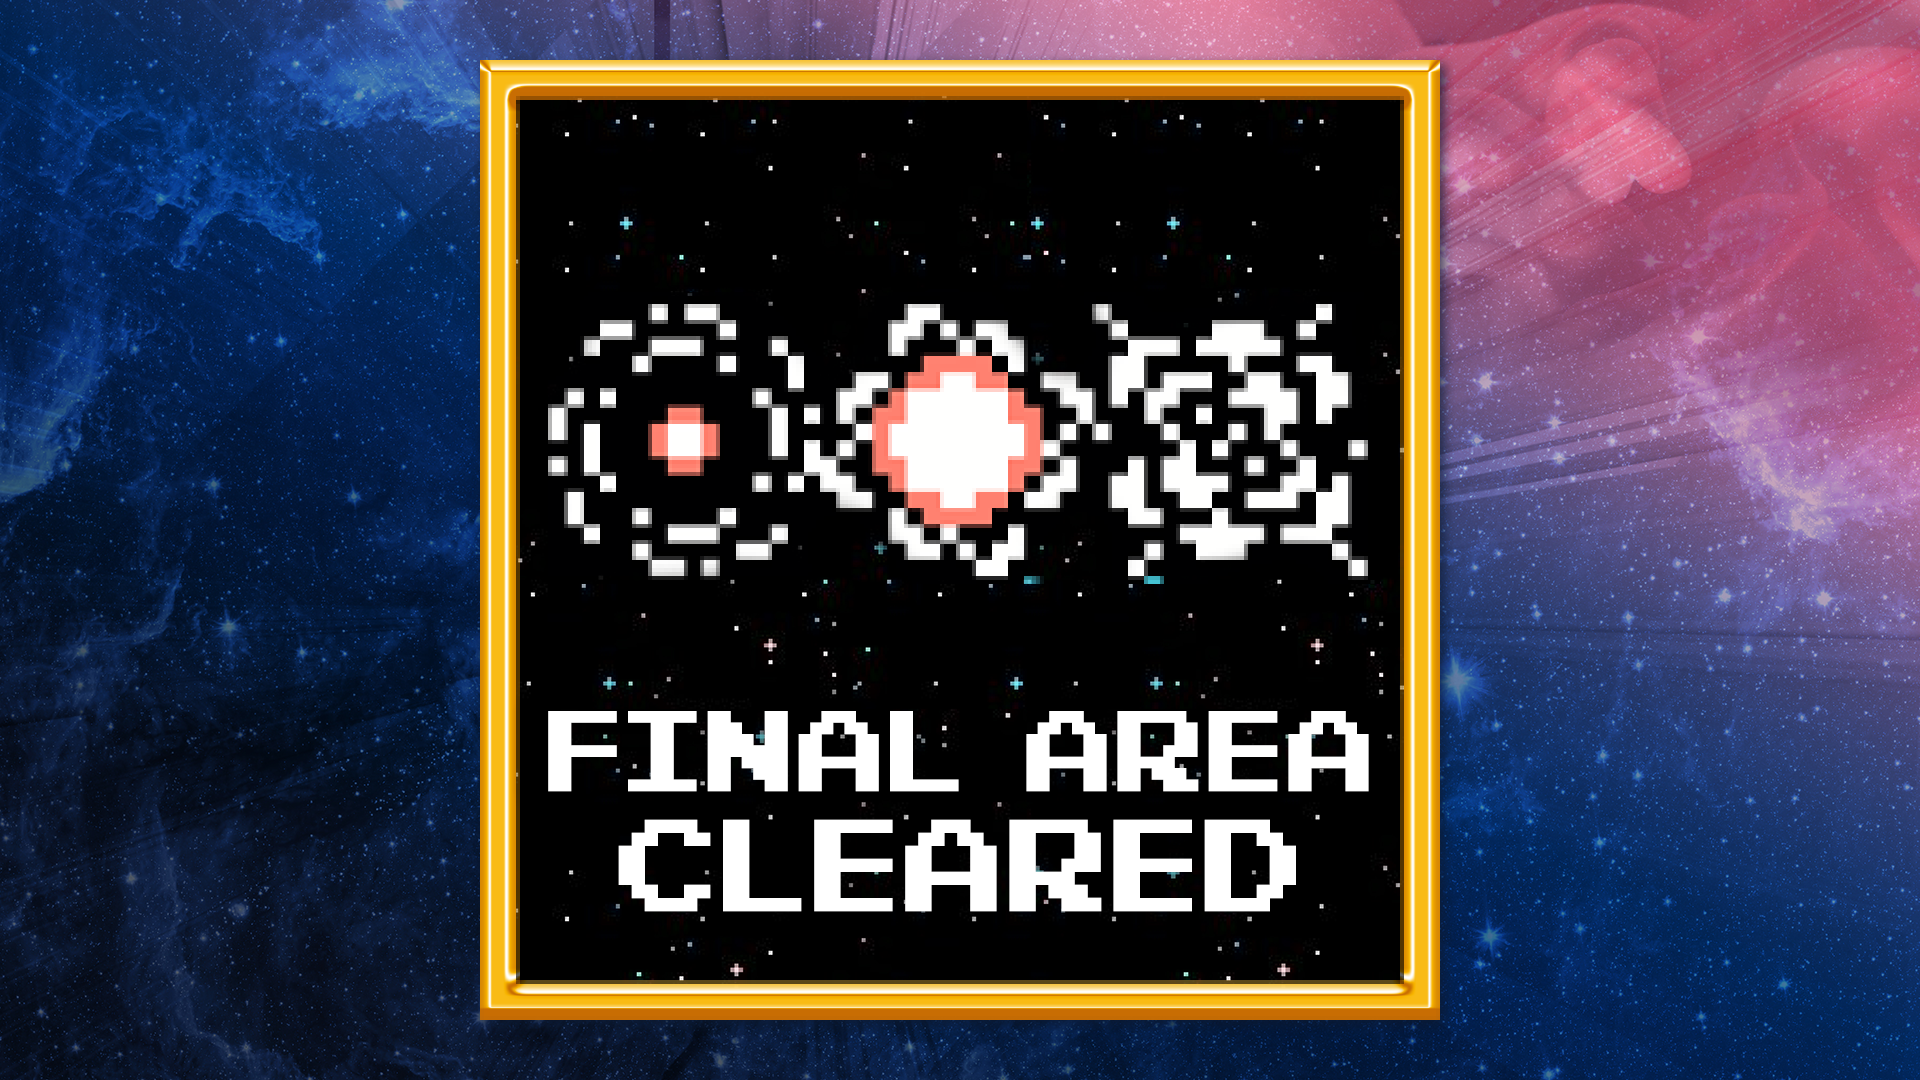 Icon for Image Fight (NES) - Final Area Cleared